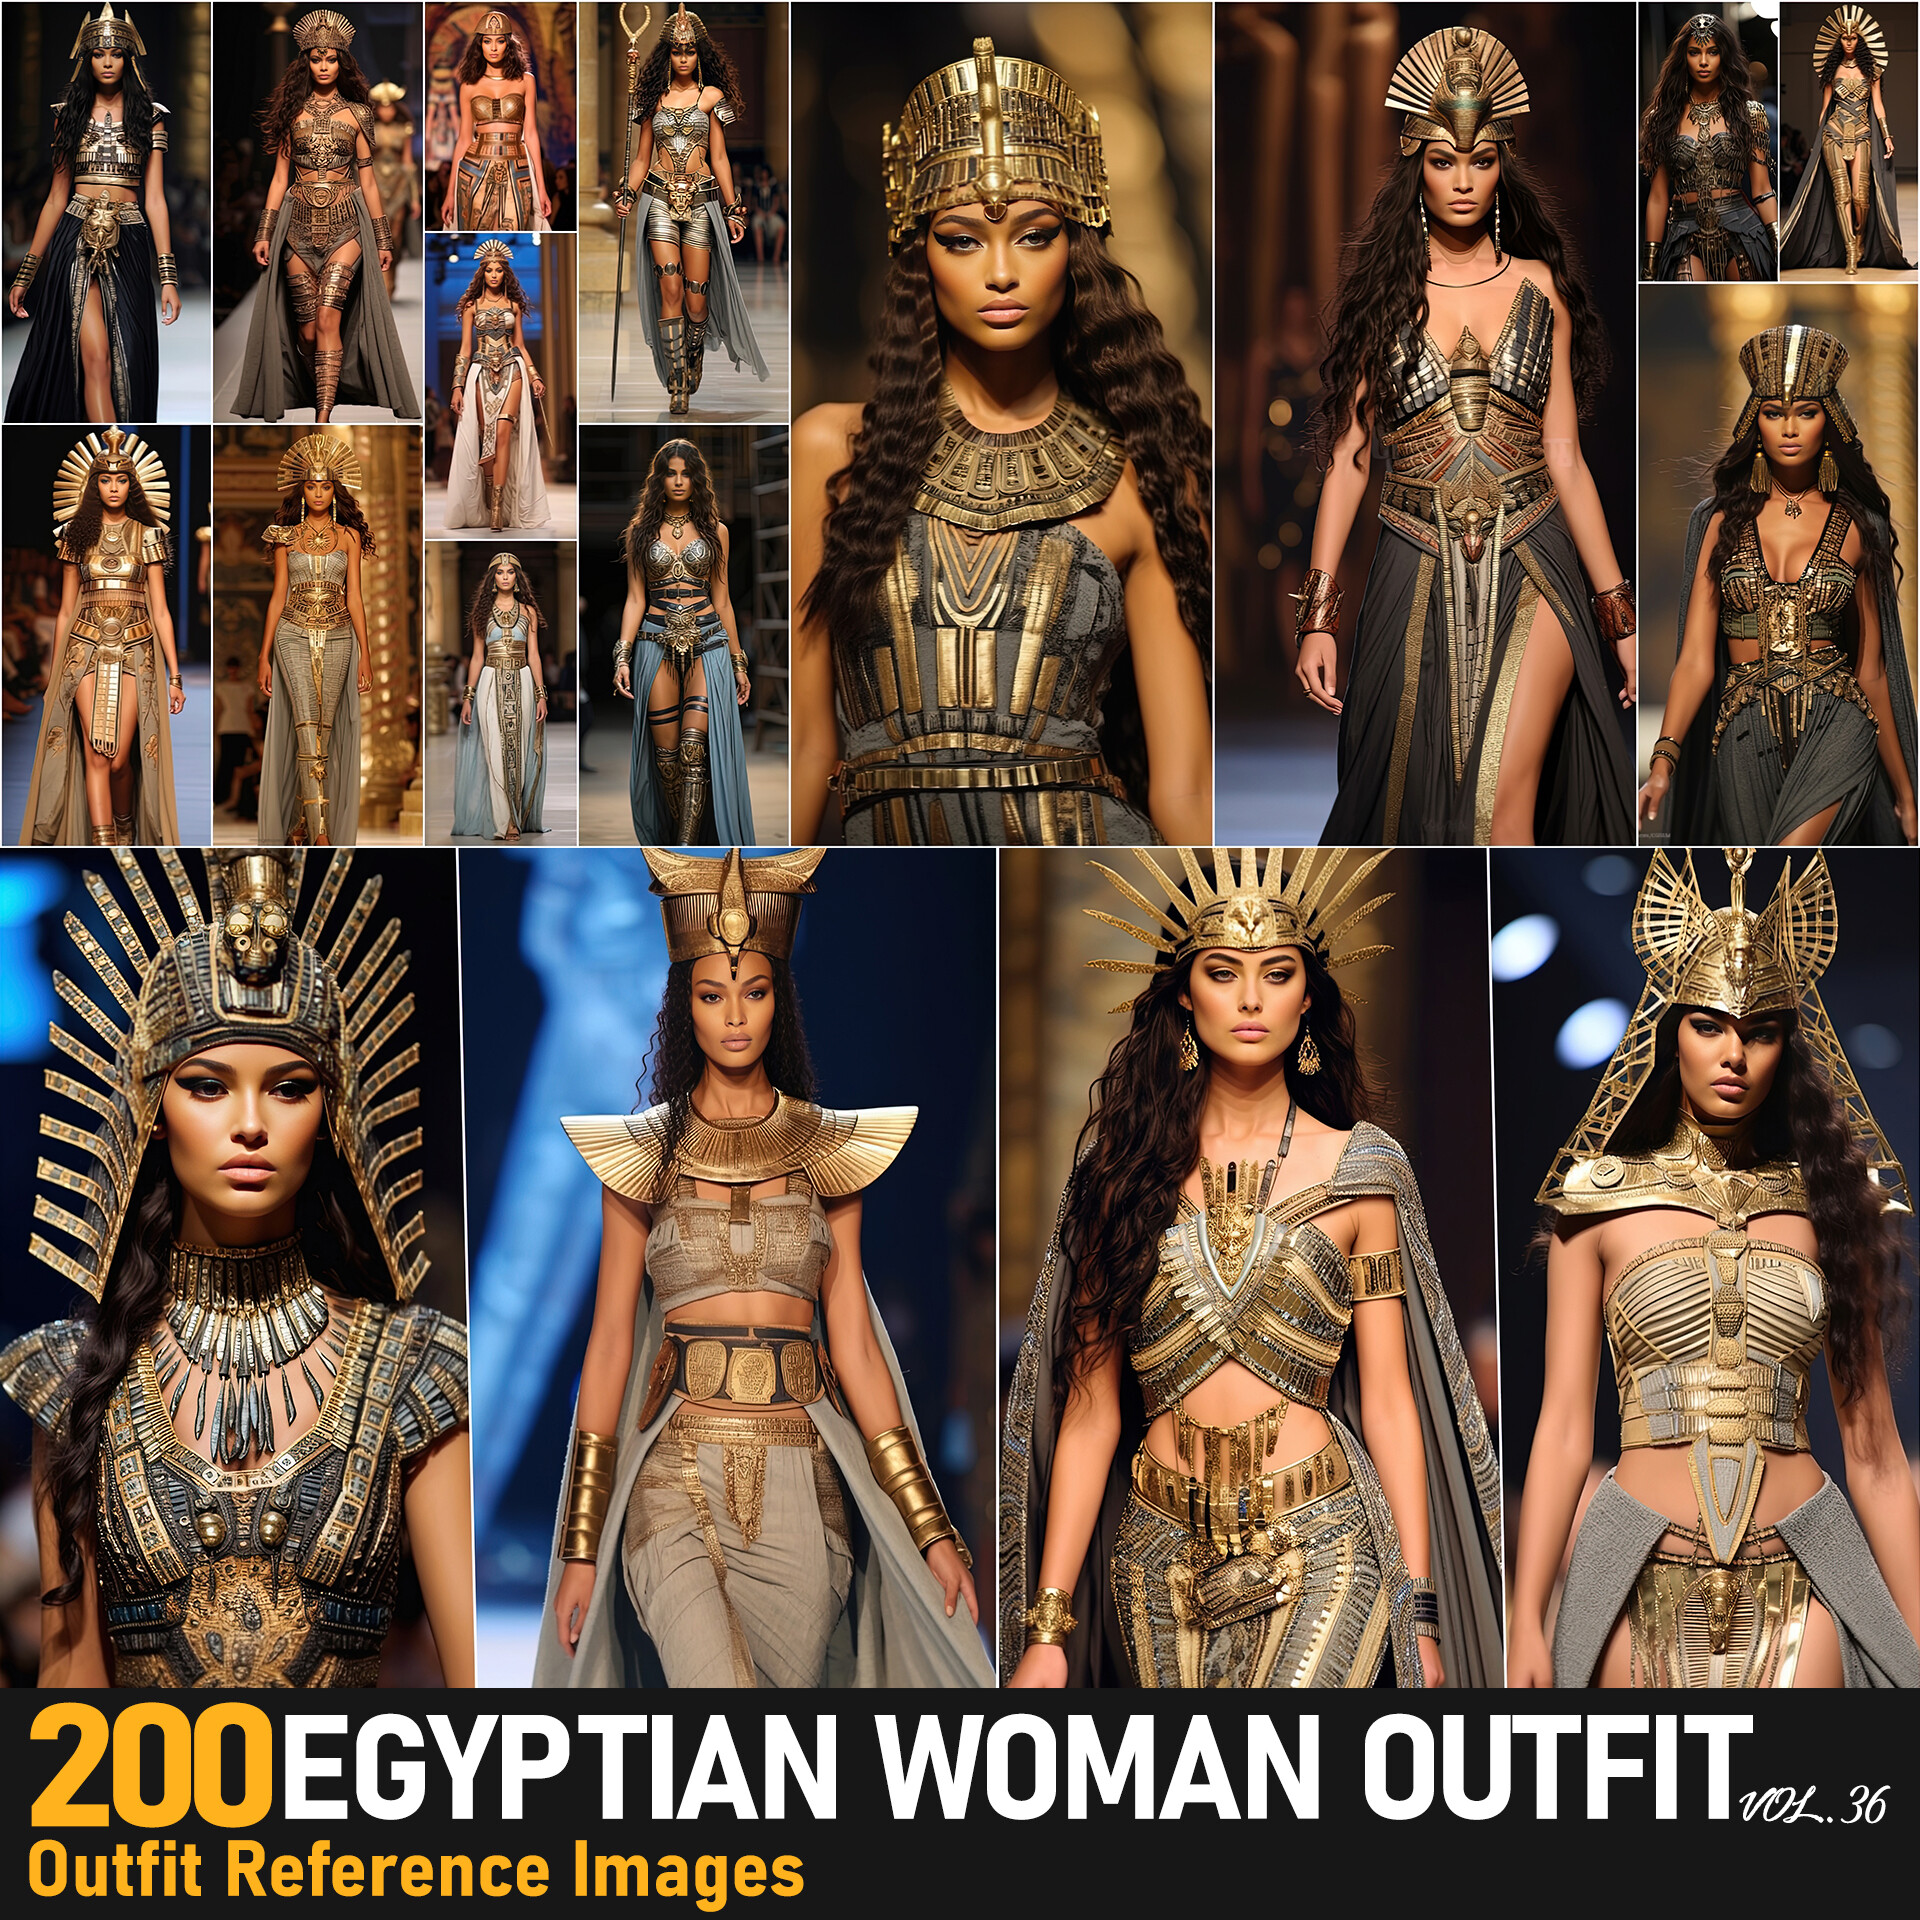 ArtStation - Egyptian Woman Outfit VOL.36|4K Reference Images